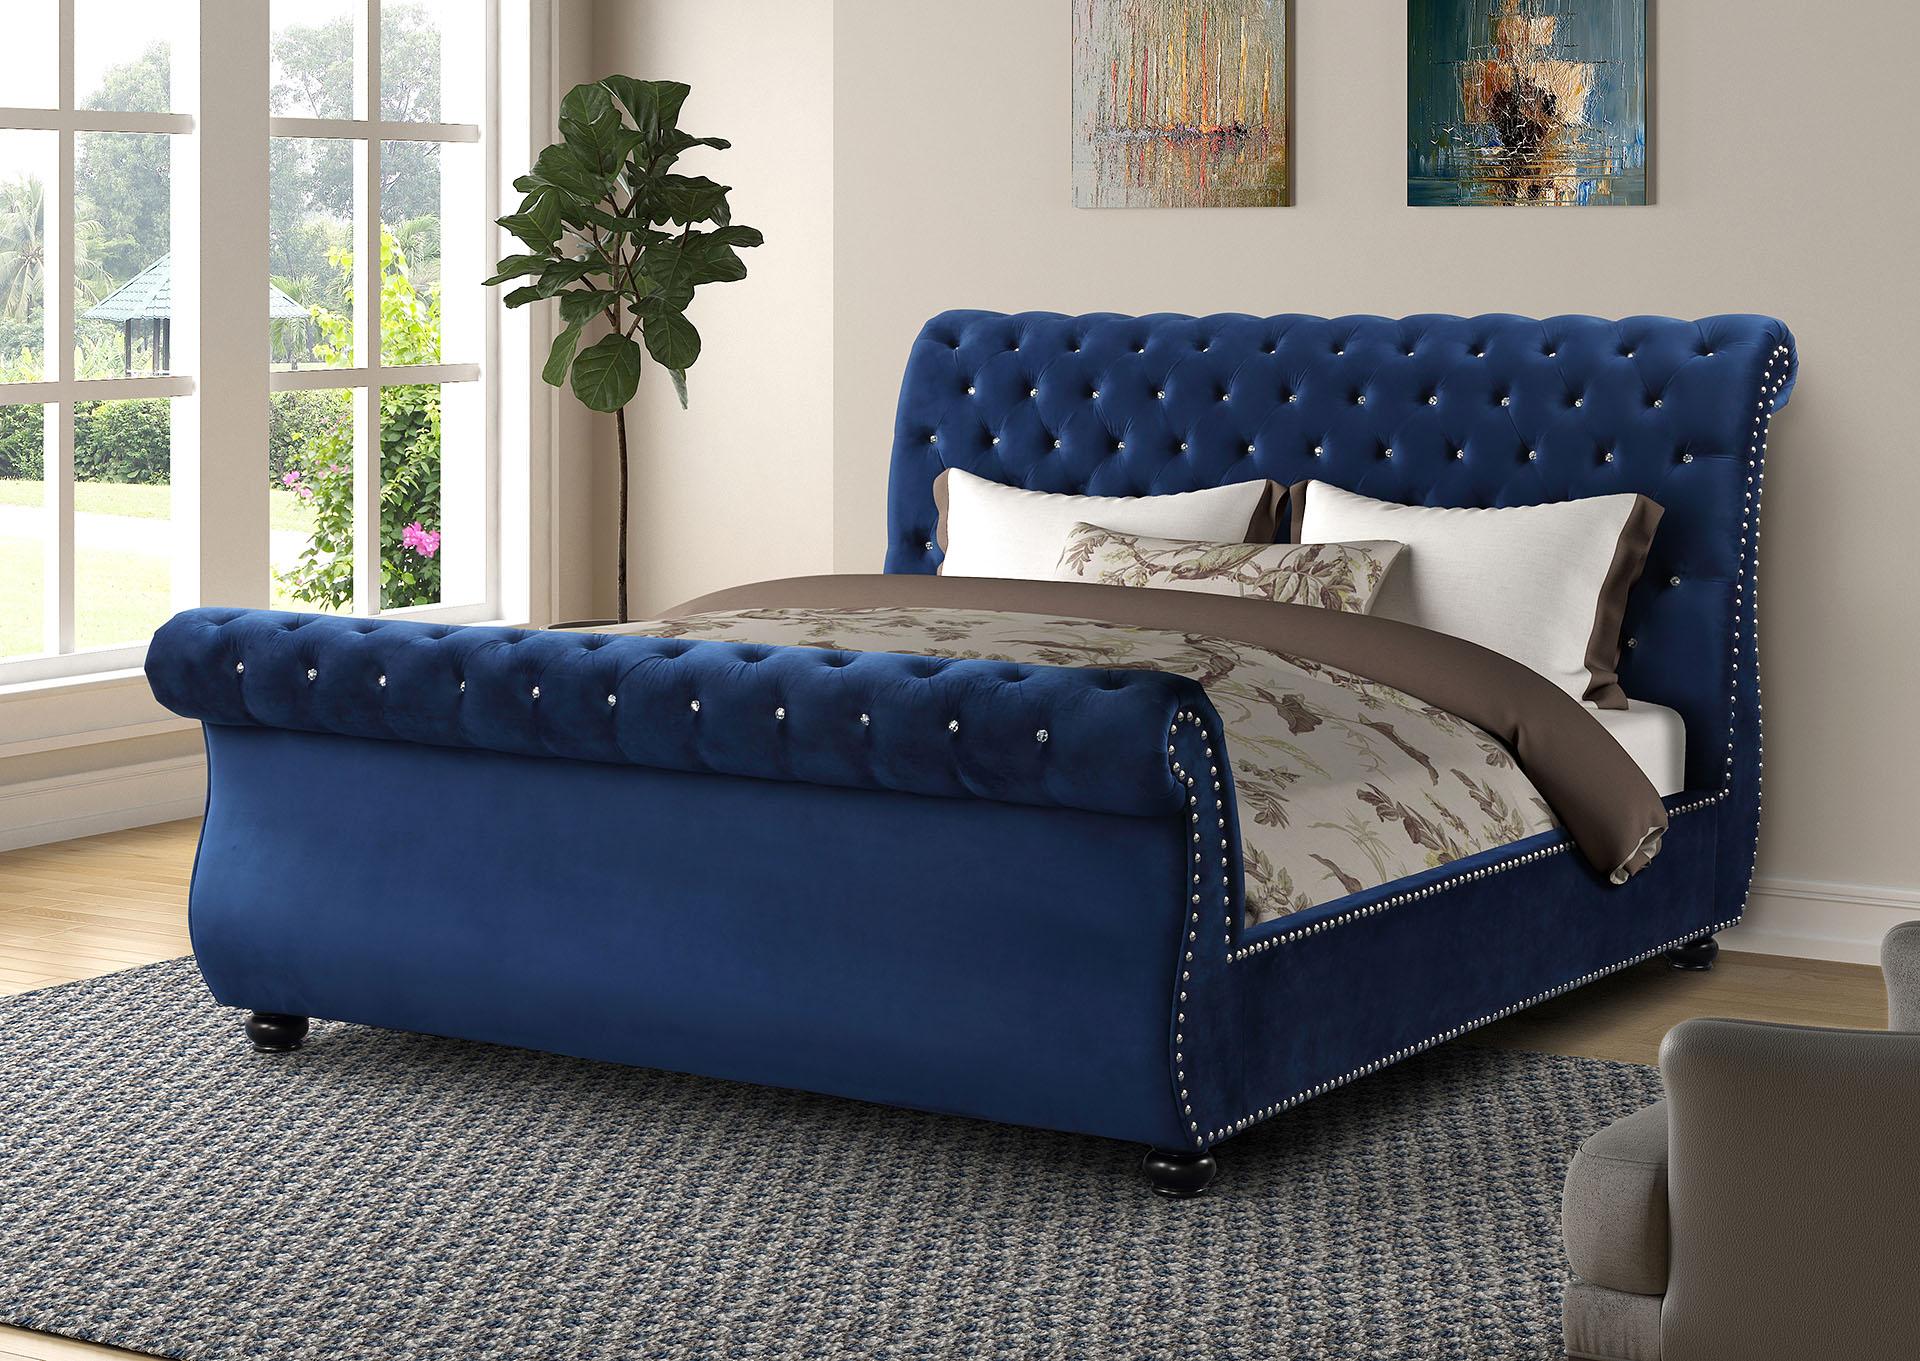 Contemporary, Modern Sleigh Bed KENDALL GHF-808857847904 in Navy 